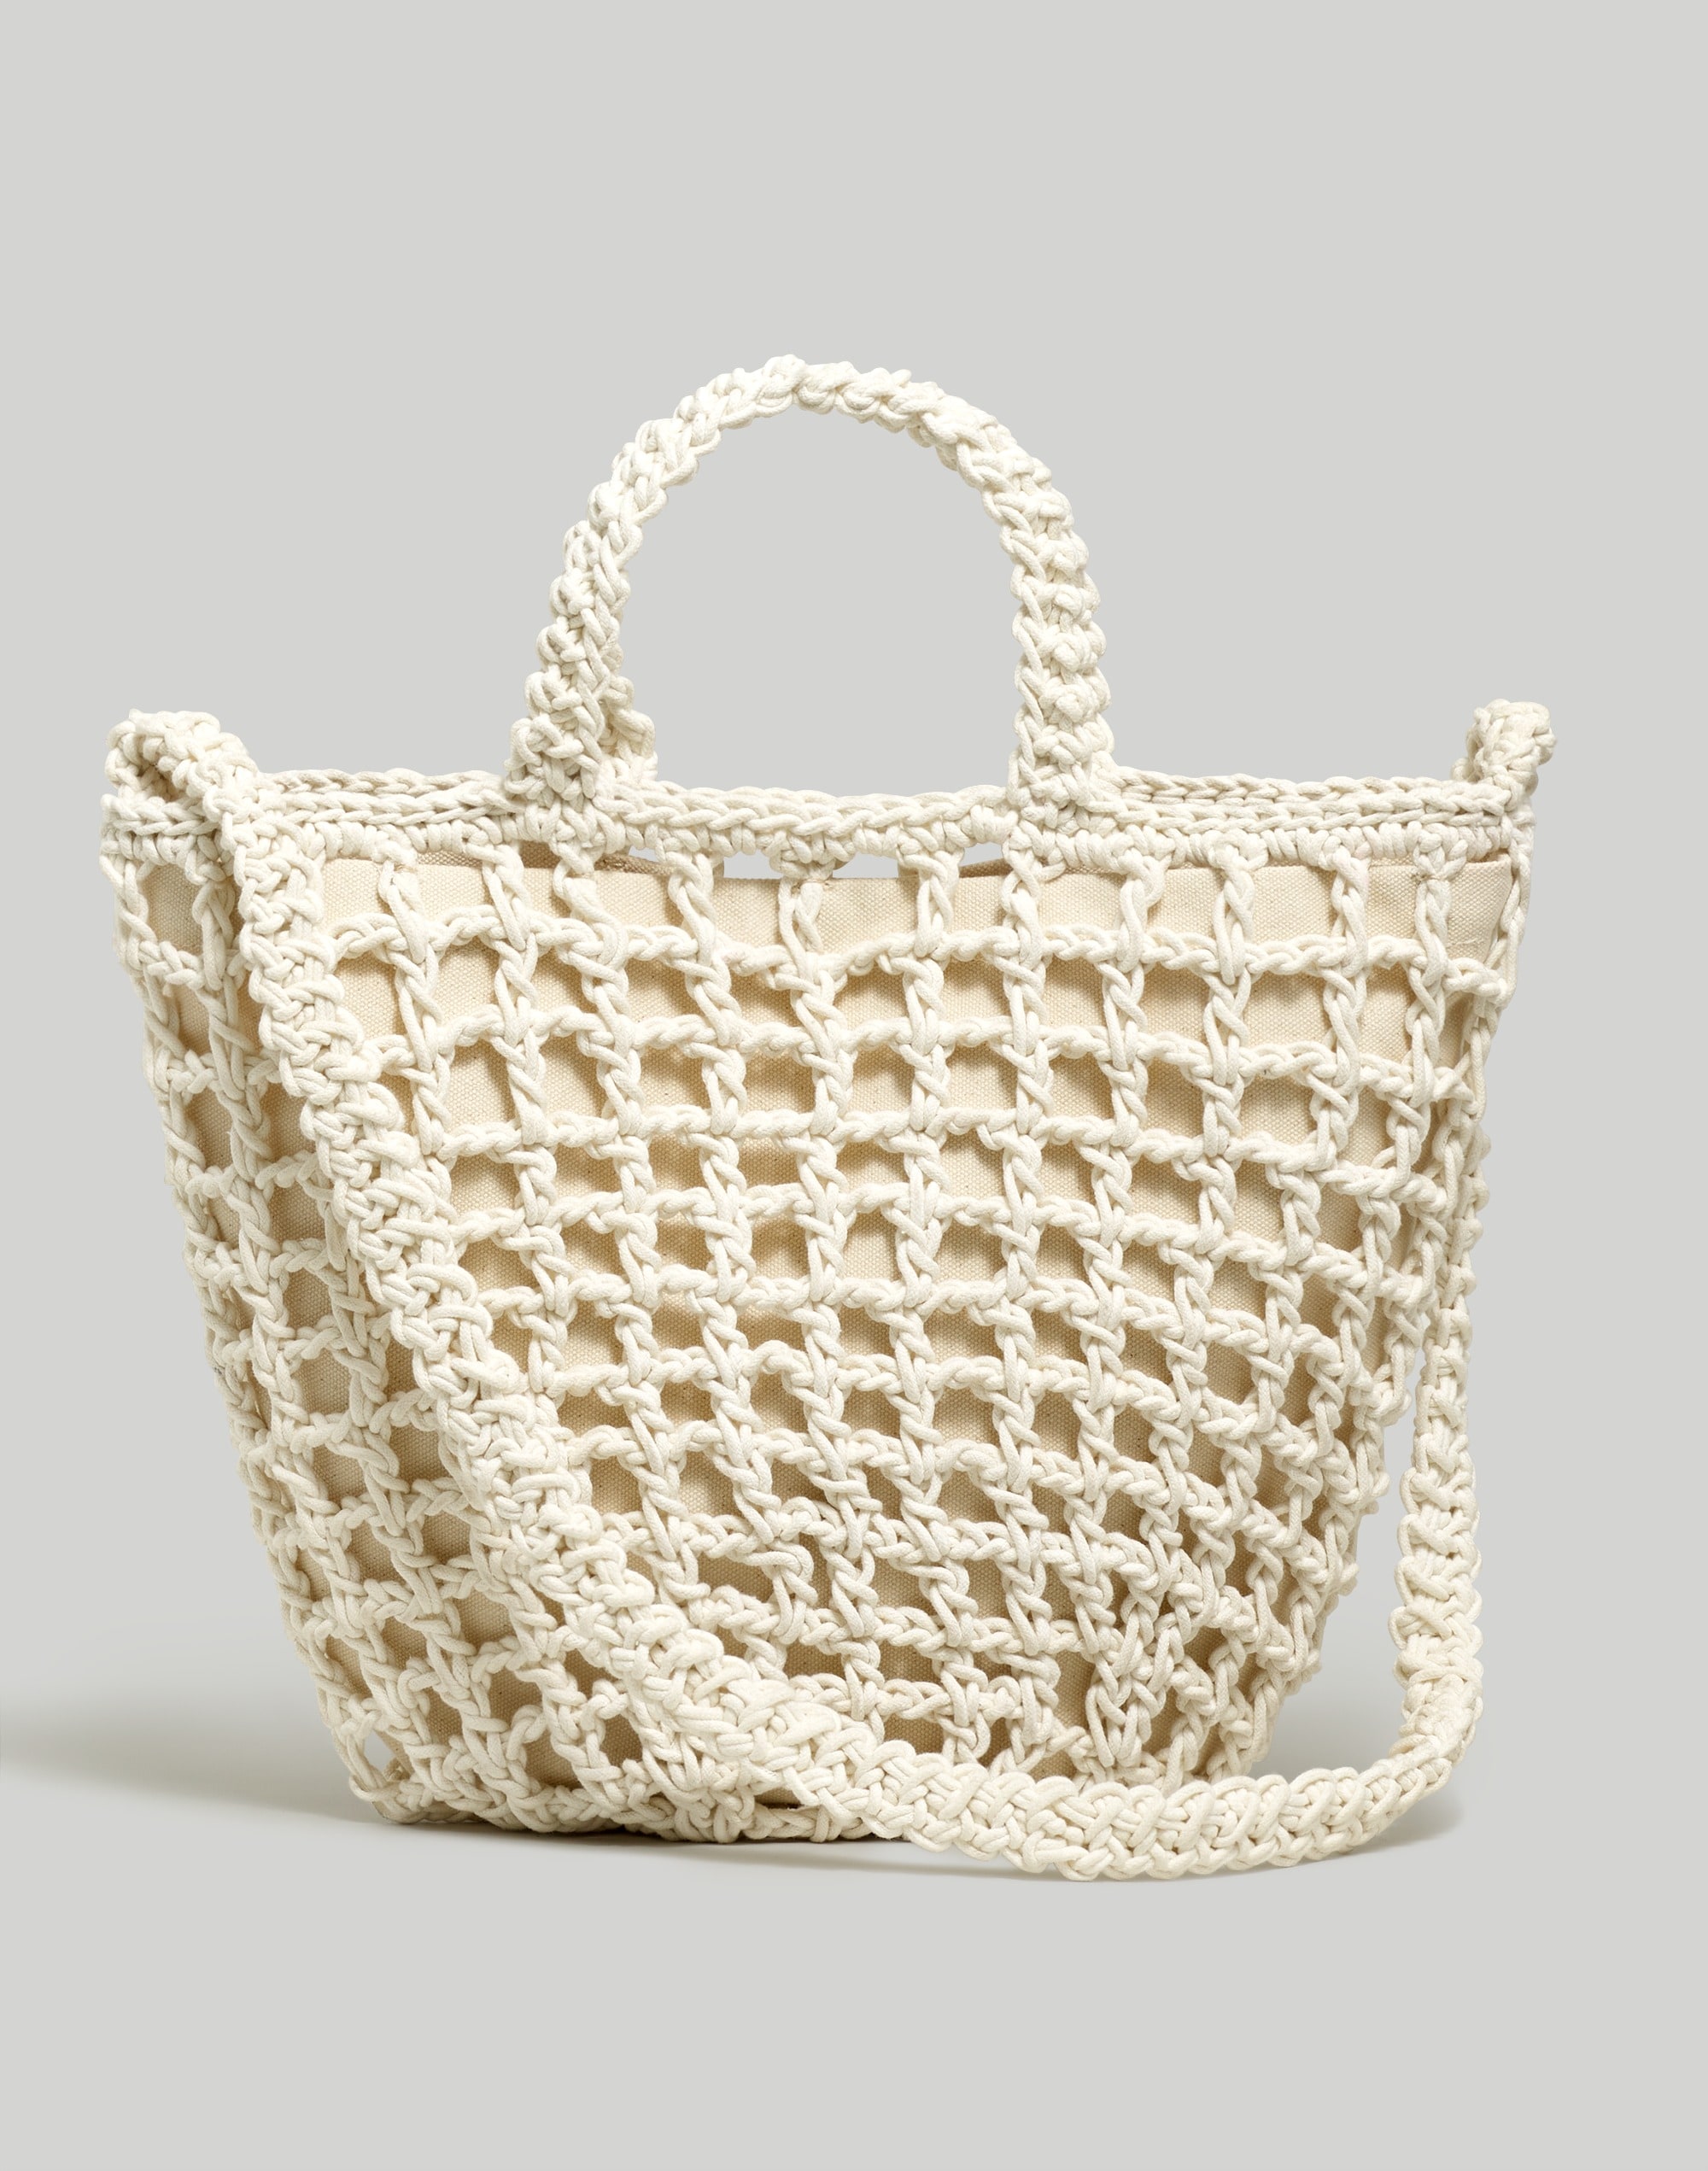 The Crocheted Shoulder Bag | Madewell